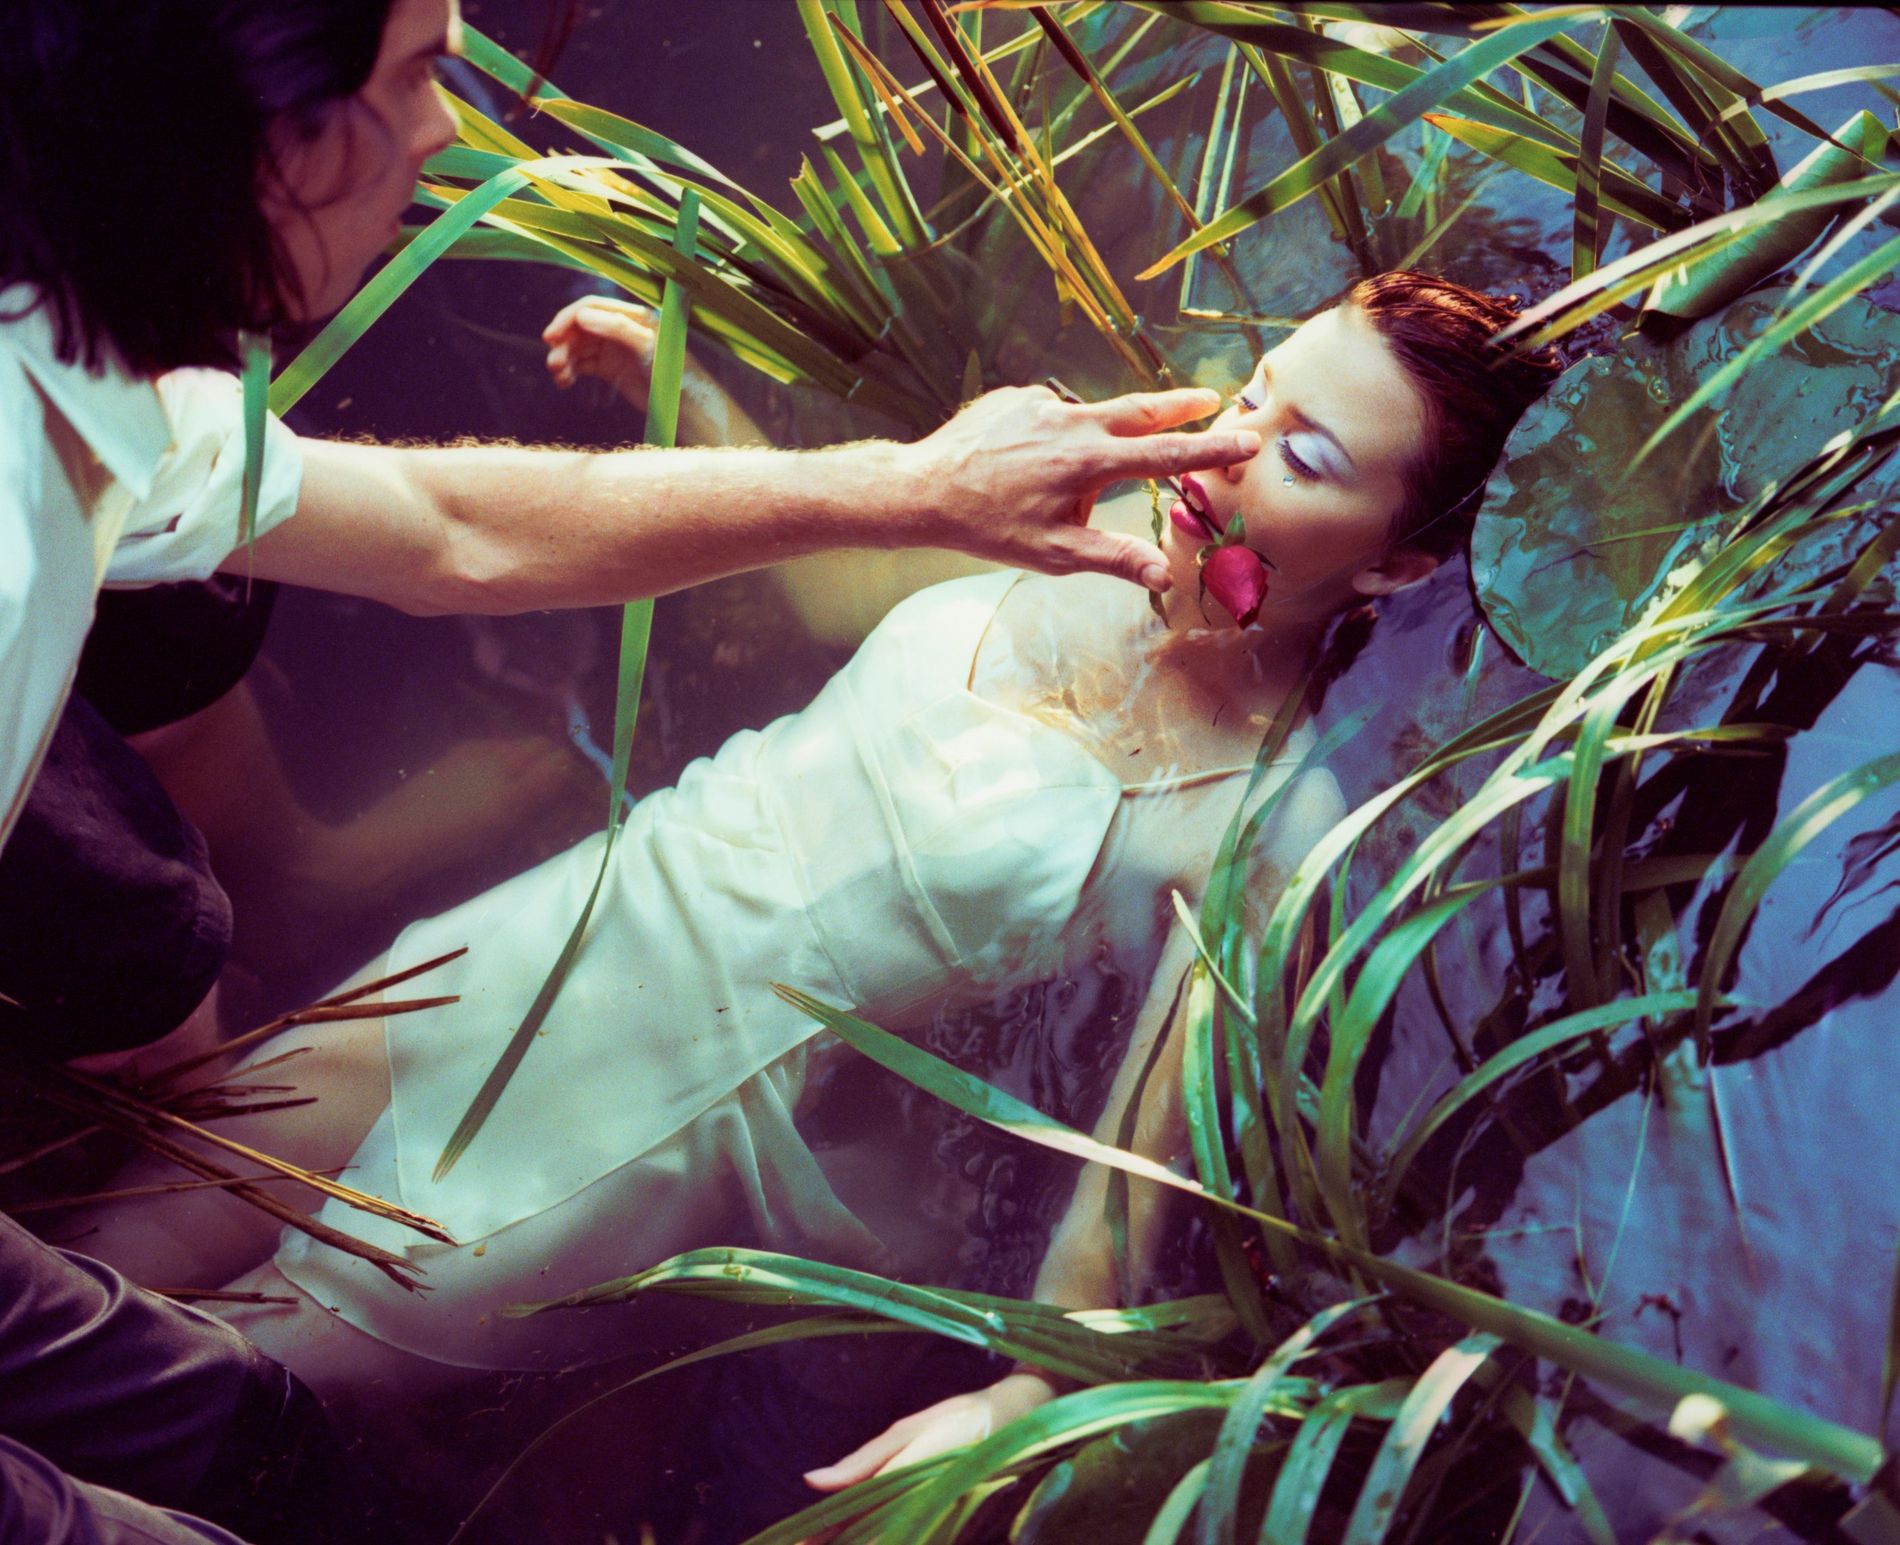 Kylie Minogue on the set of the video for her duet with Nick Cave 'Where the Wild Roses Grow